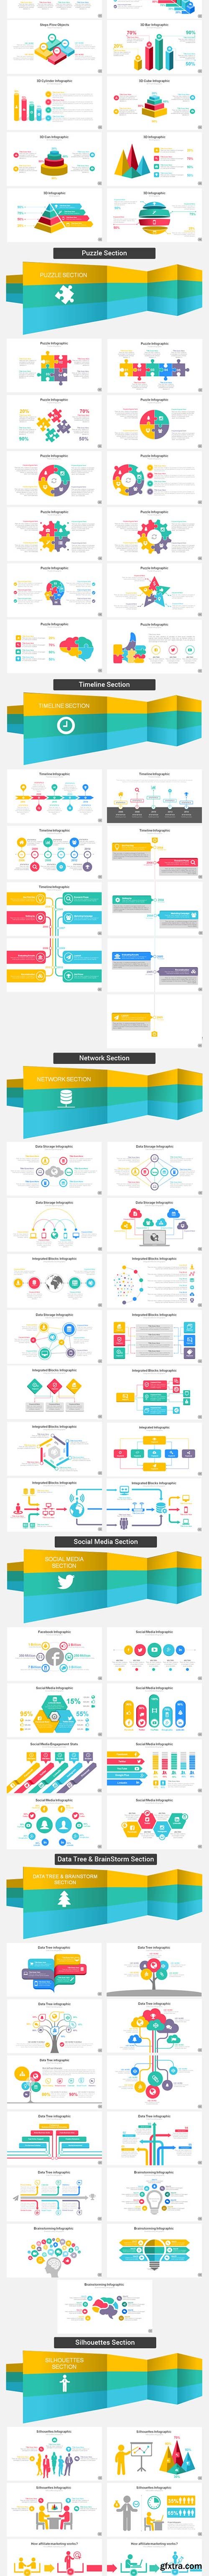 GraphicRiver - 3 Awesome Powerpoint Template Bundle